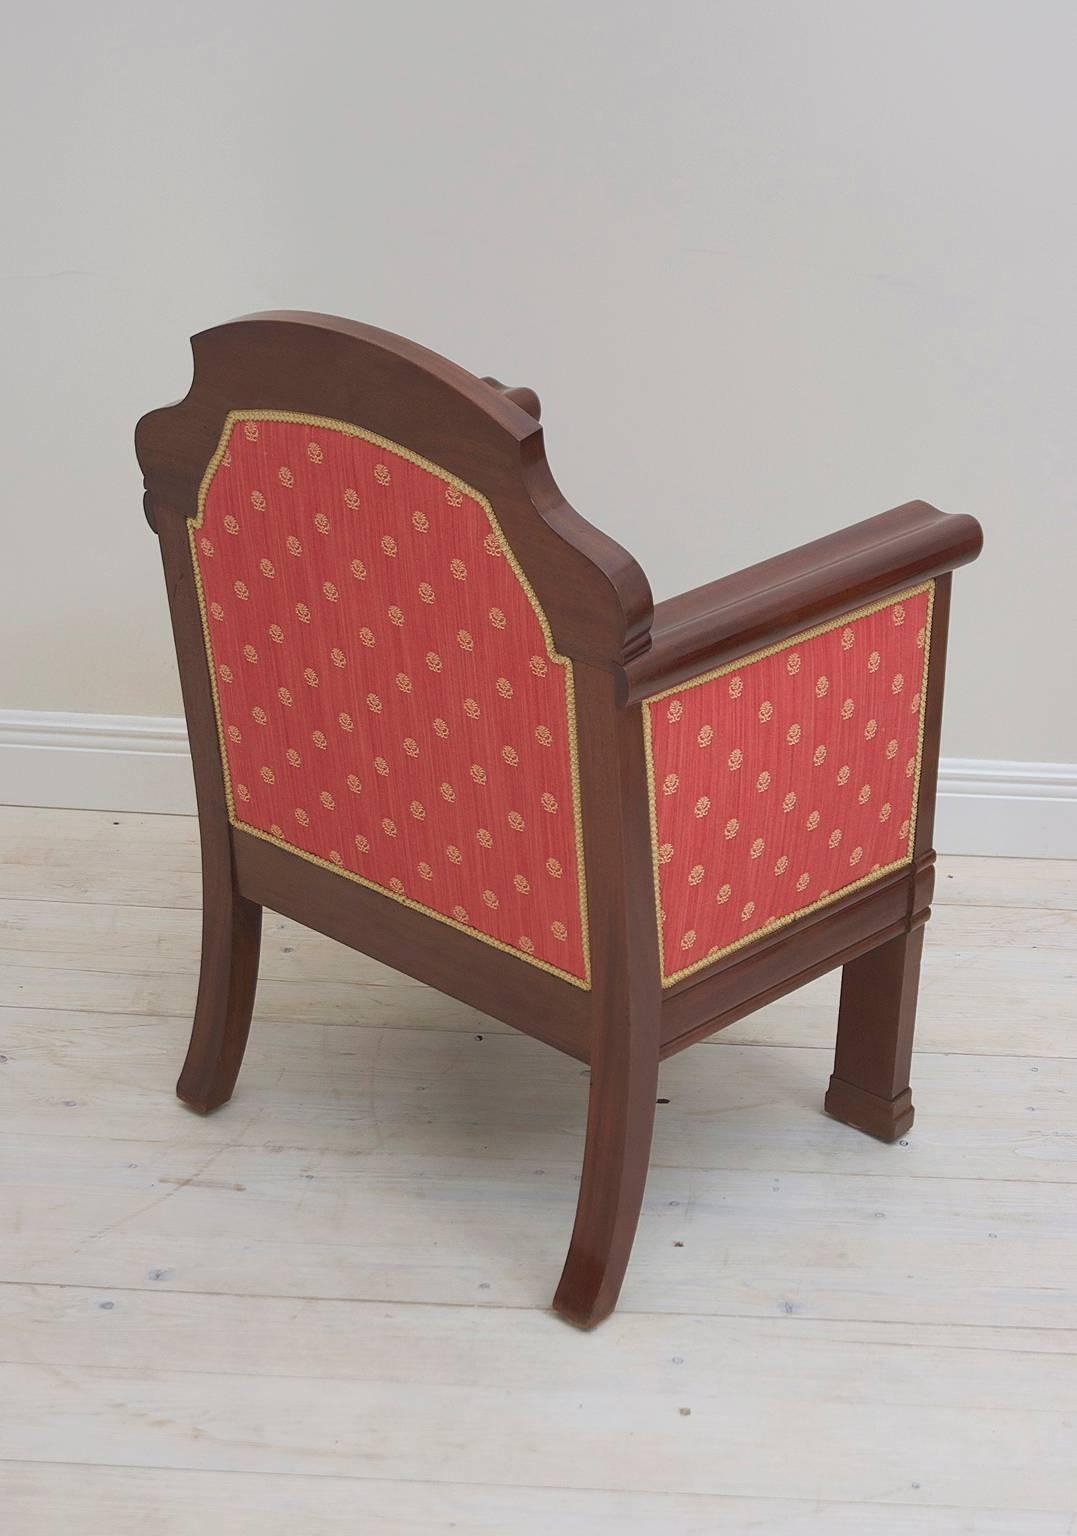 20th Century Pair of Danish Art Deco Club Chairs/ Bergeres in Mahogany w/ Upholstery, c. 1920 For Sale